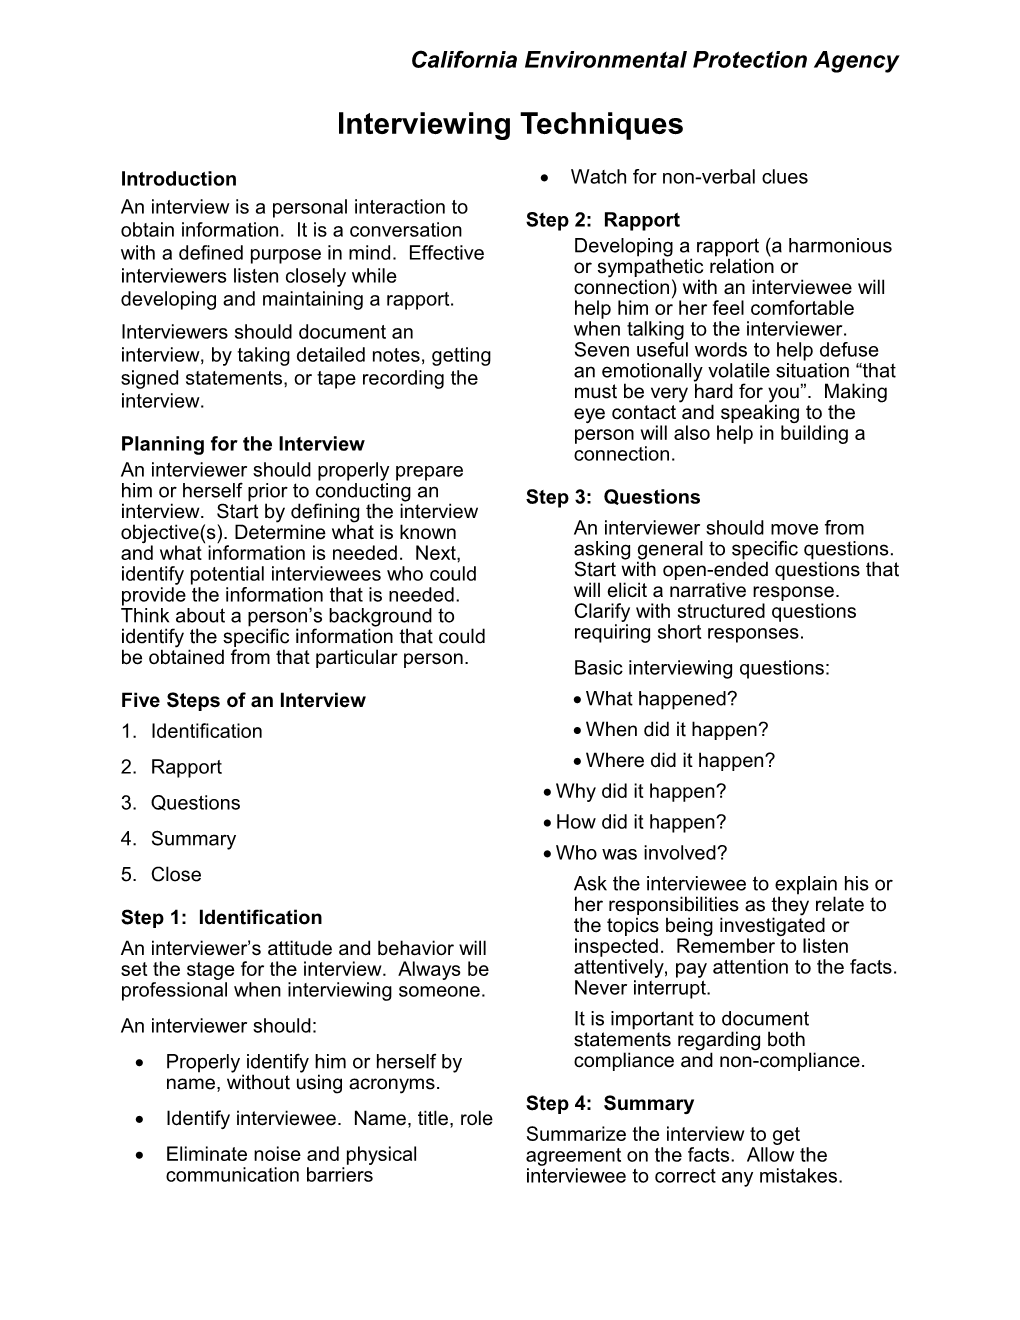 Fact Sheet on Interviewing Techniques